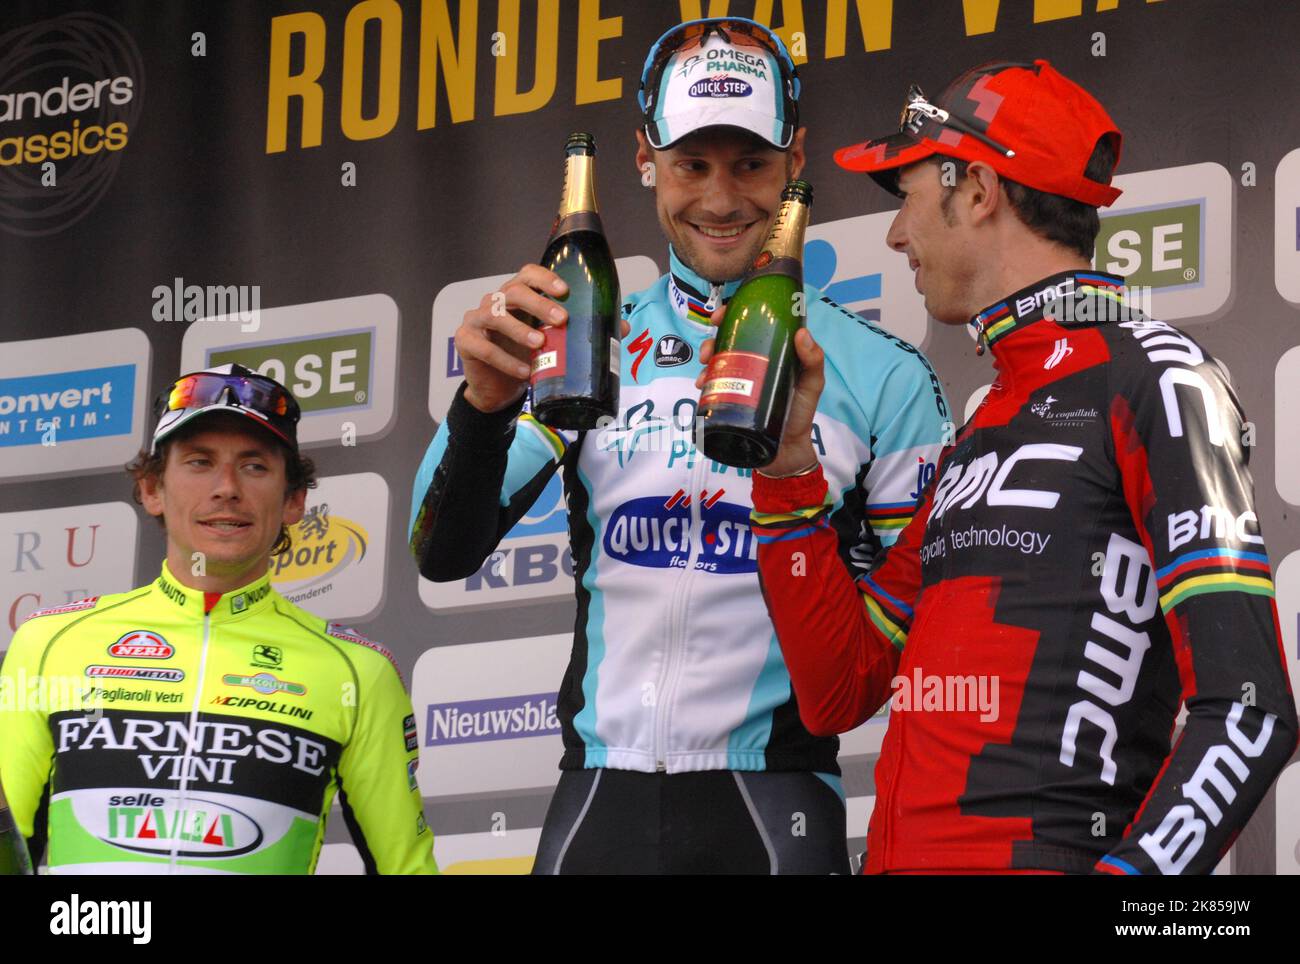 Tom Boonen of Team Omega Pharma - Quickstep stands on the podium after winning the 2012 Tour of Flanders (Ronde Van Vlaanderen) in Oudenaarde, Belgium ahead of Fillipo Pozatto of Team Farnese Vini - Selle Italia and Alessandro Ballan of BMC racing team Stock Photo